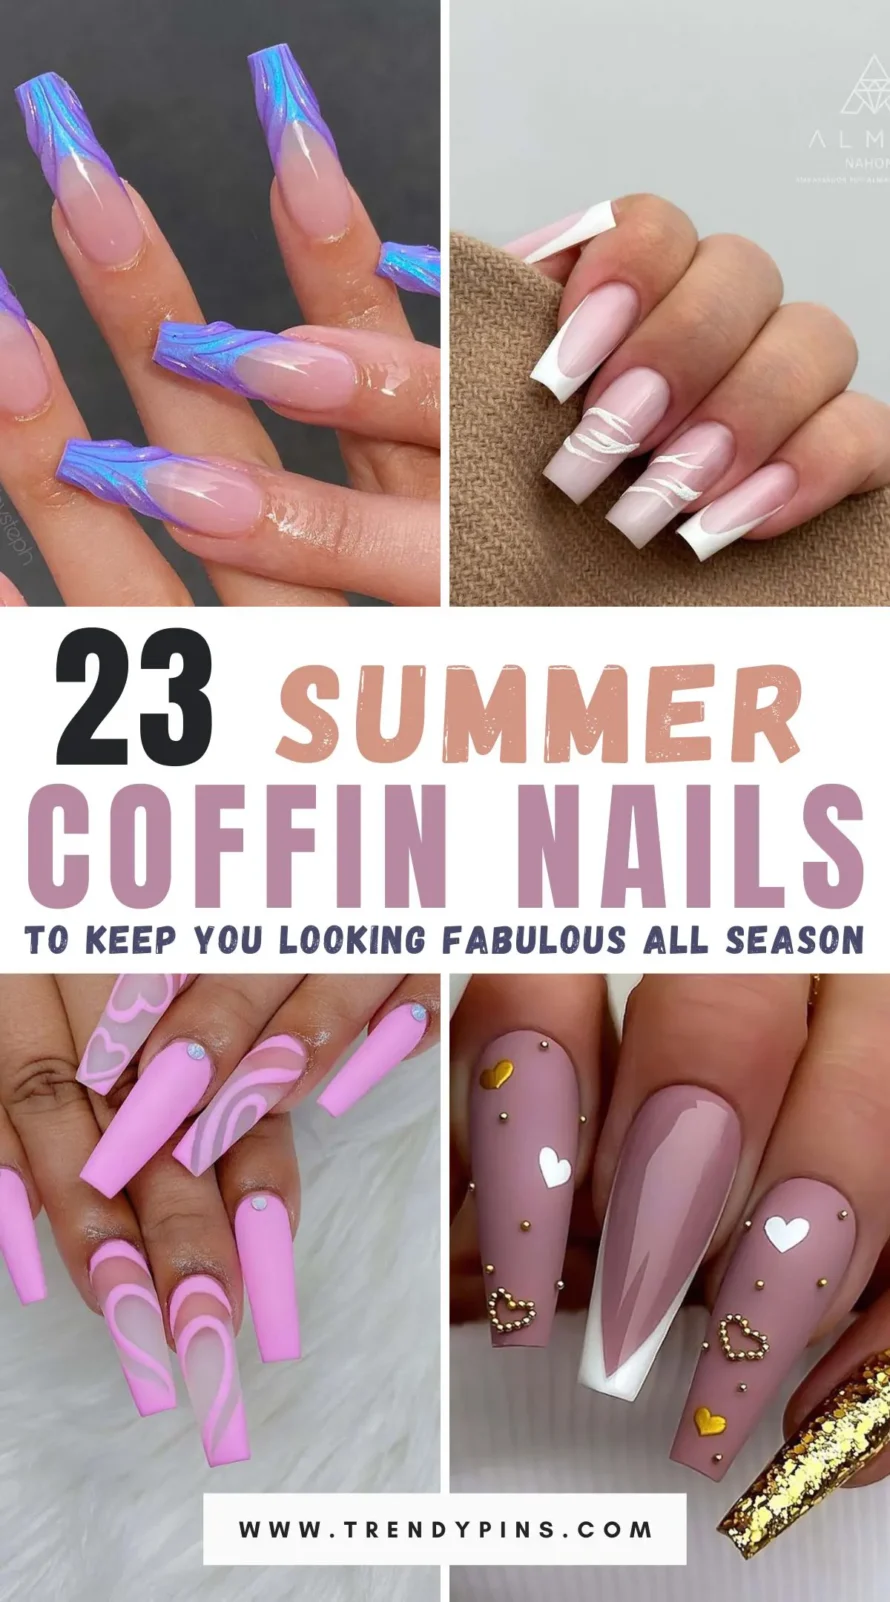 Get ready to elevate your summer style with 23 stunning coffin nail designs! Dive into a world of vibrant colors and creative patterns that will make your nails the ultimate fashion statement. From bold neons to intricate art, these designs are perfect for adding a splash of fun to your look. Discover your next favorite nail art idea and rock the season in style!